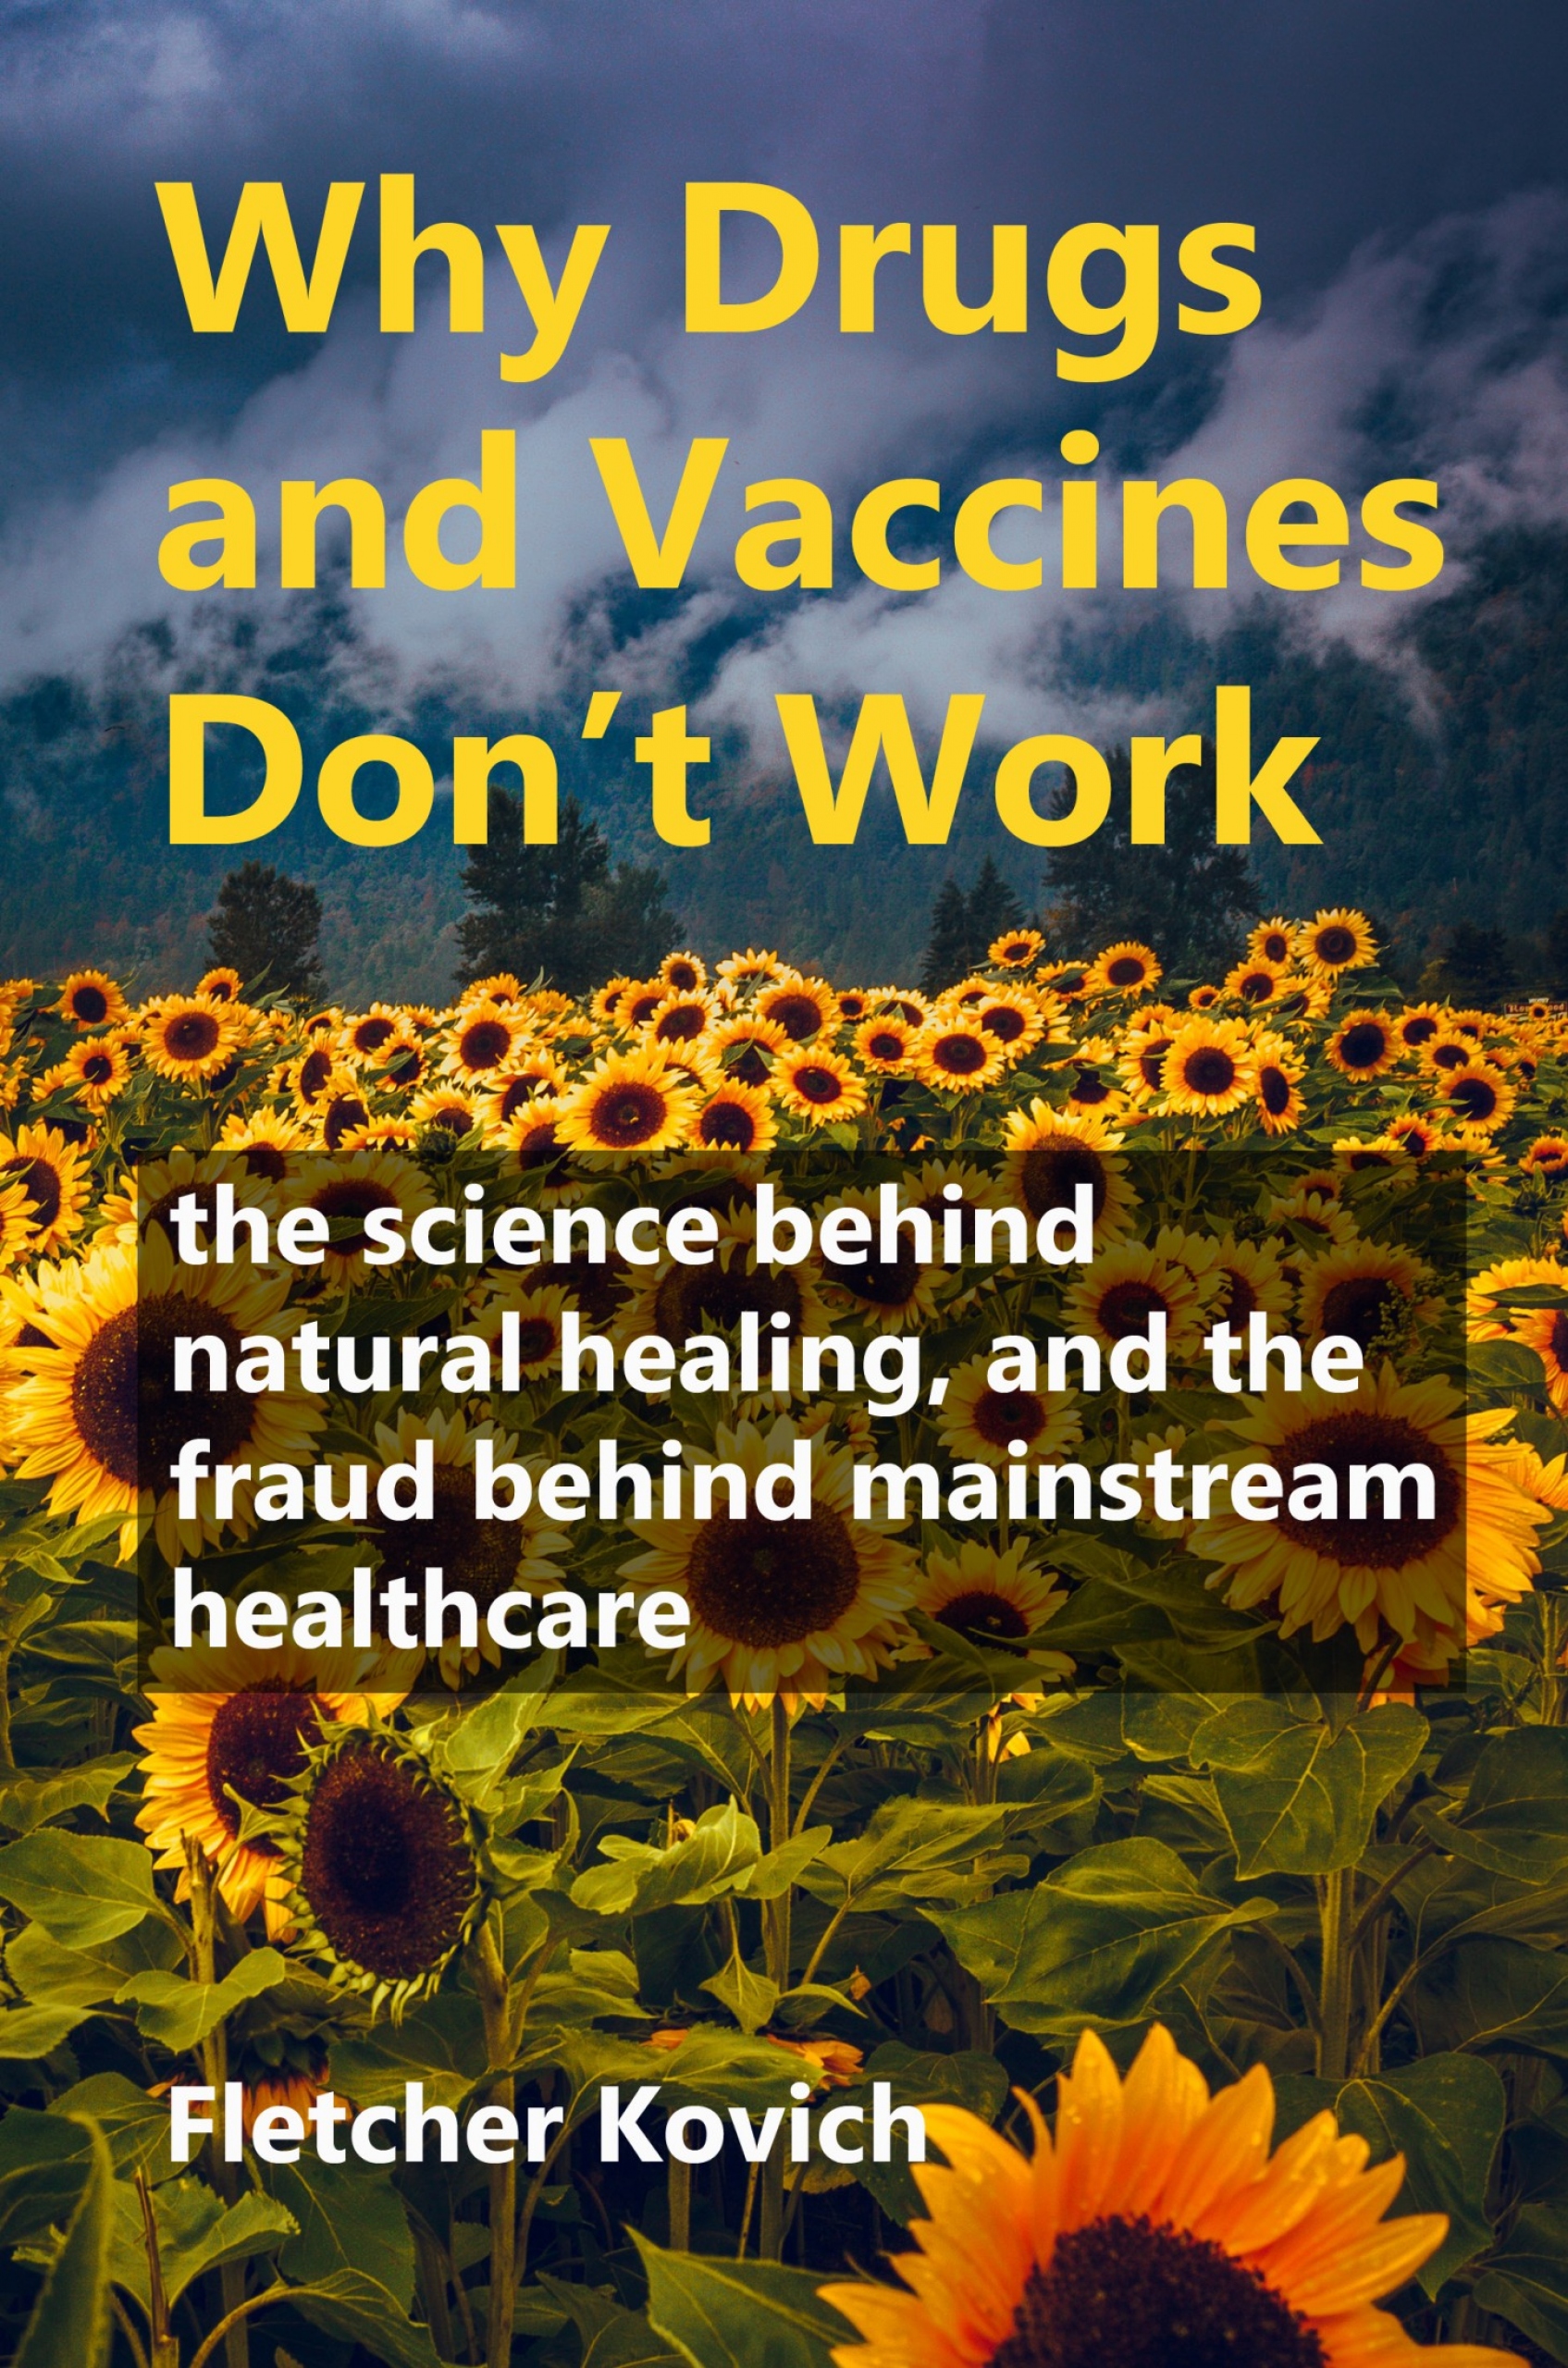 Why Drugs and Vaccines Don"t Work